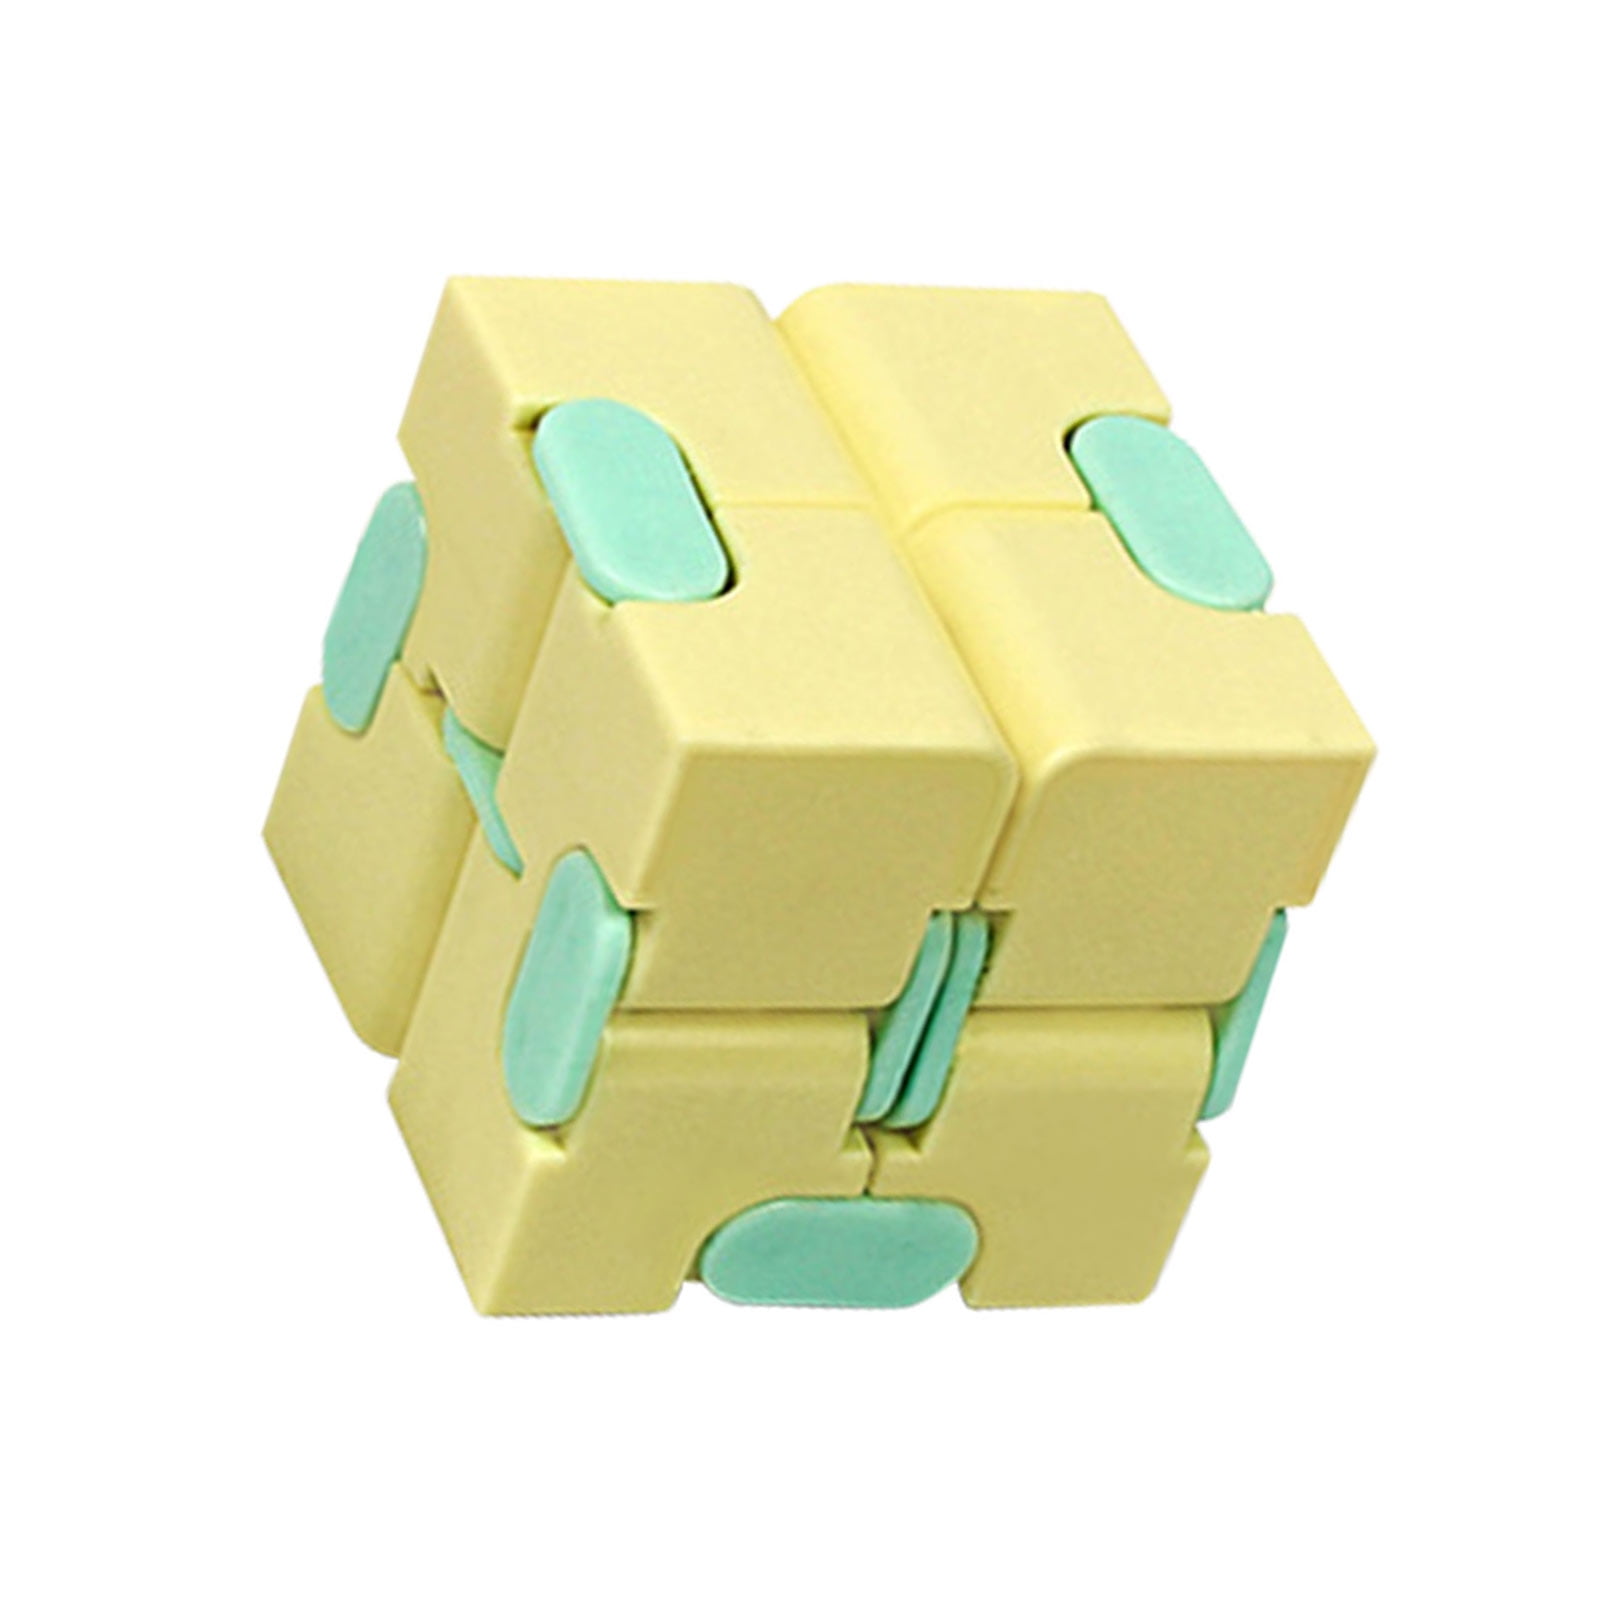 Details about   Infinity Cube Autism Anxiety Stress Relief Toys Fidget Kids Adults US